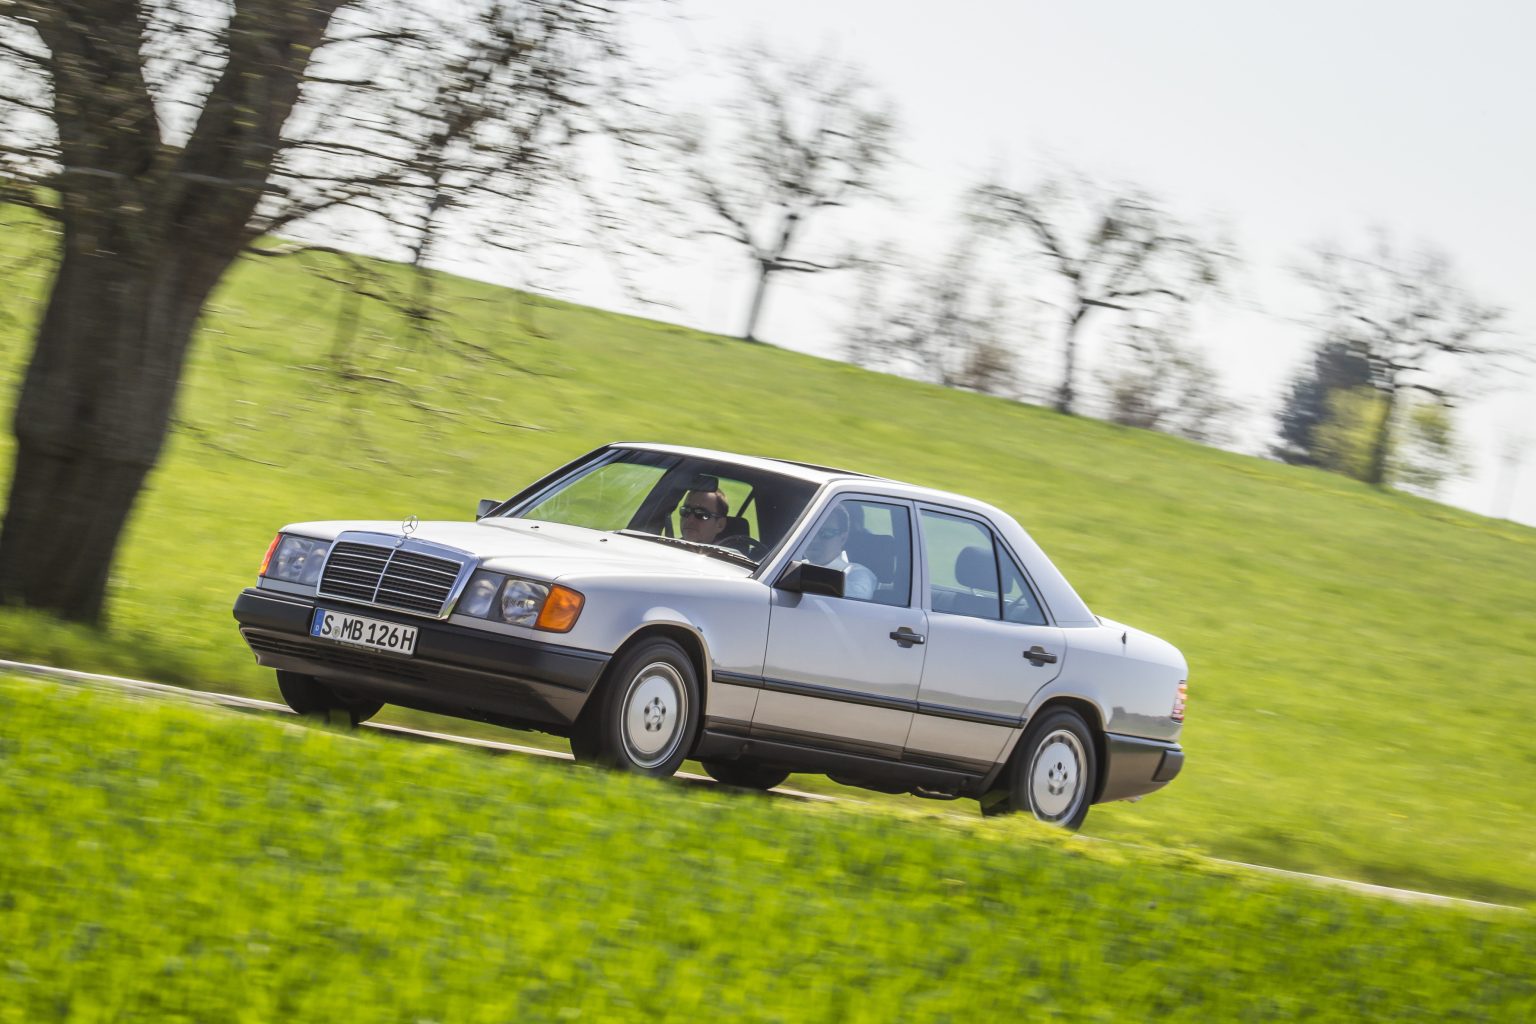 Mercedes-Benz 300 E W124 Saloon. Moving vehicle. Photo from the Mercedes-Benz Classic Insight “History of the E-Class” from 19 to 22 April 2016.